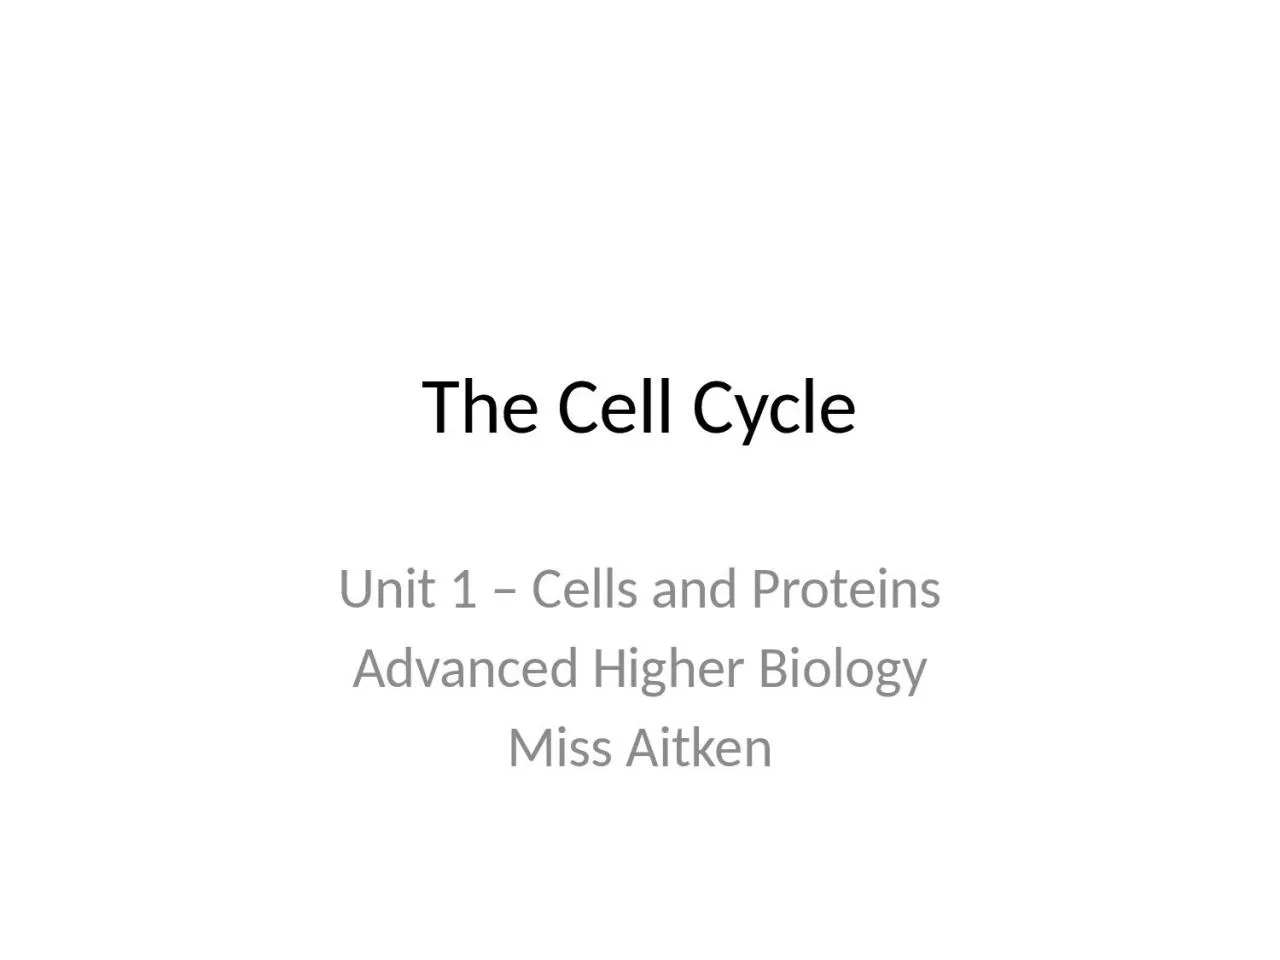 The Cell Cycle Unit 1 – Cells and Proteins